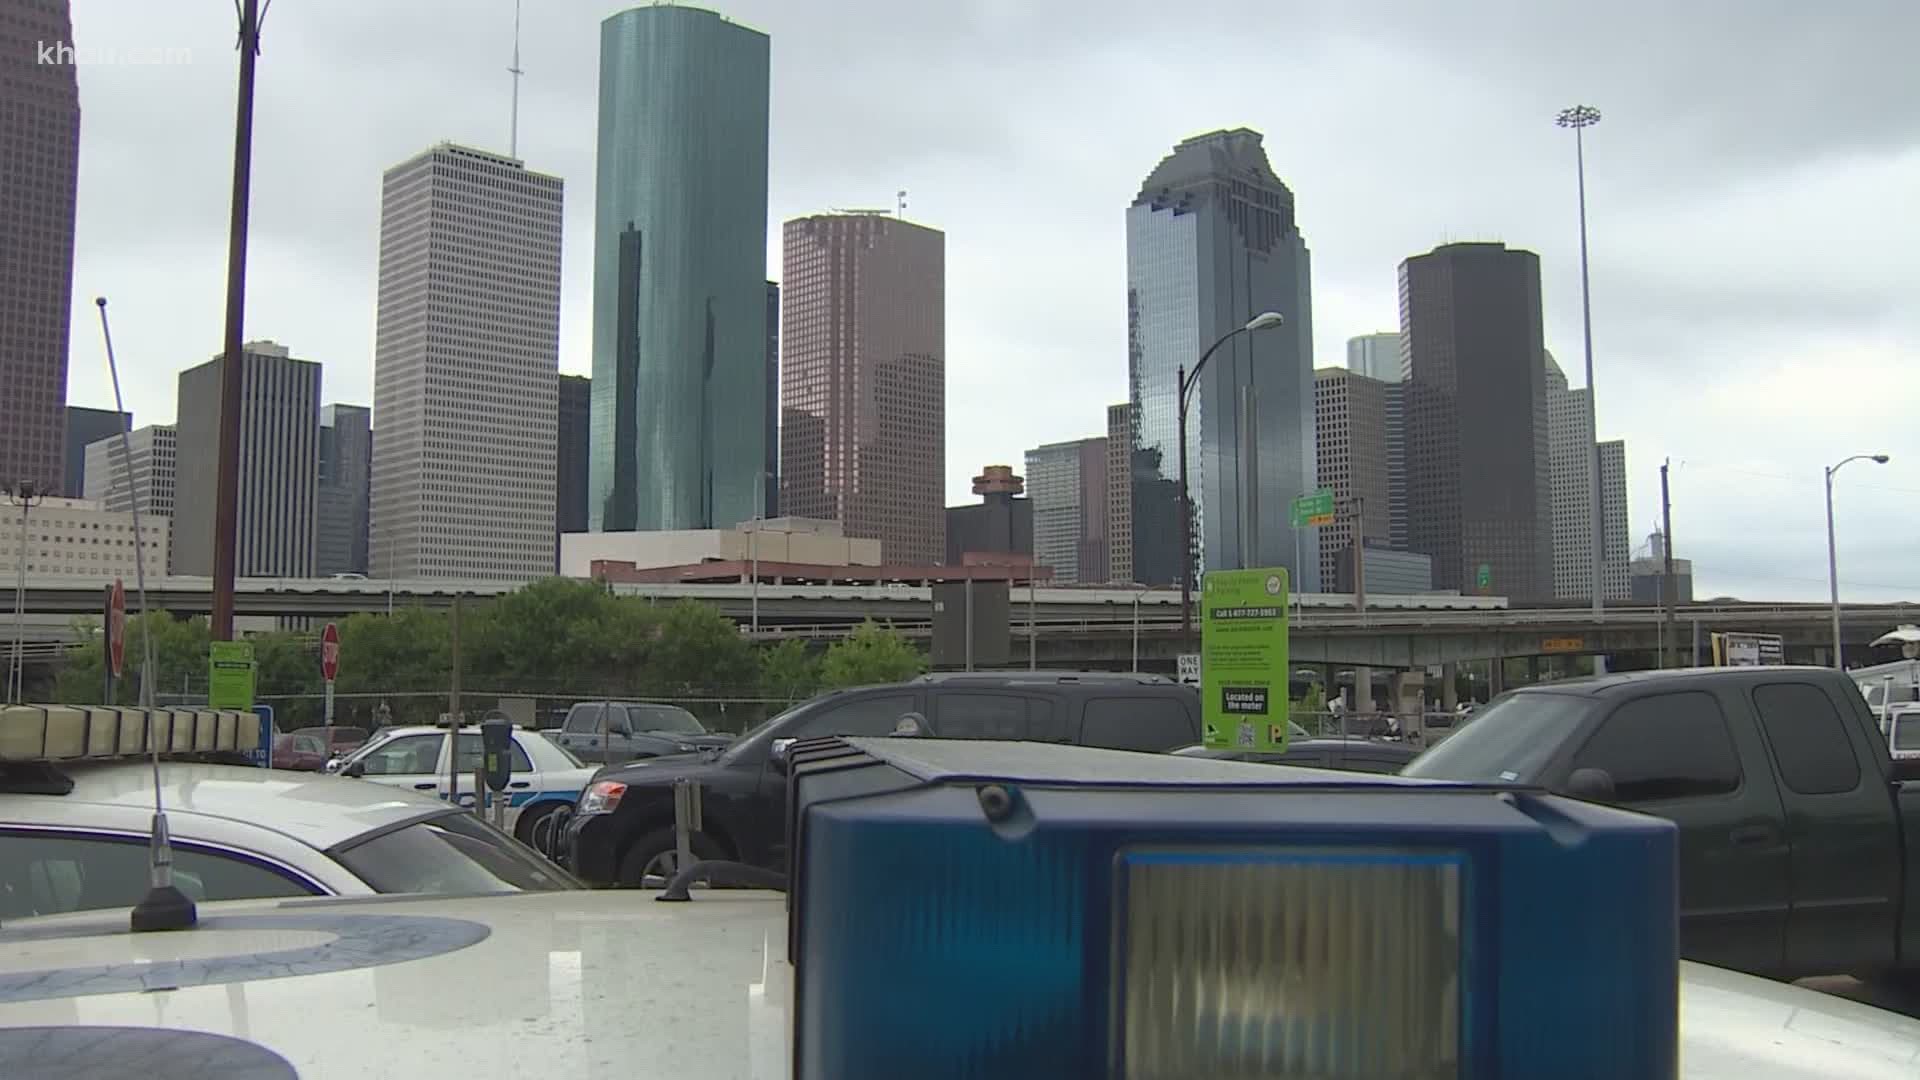 A new report from Rice University Kinder Institute shows that the city of Houston will be the hardest hit city in Texas.